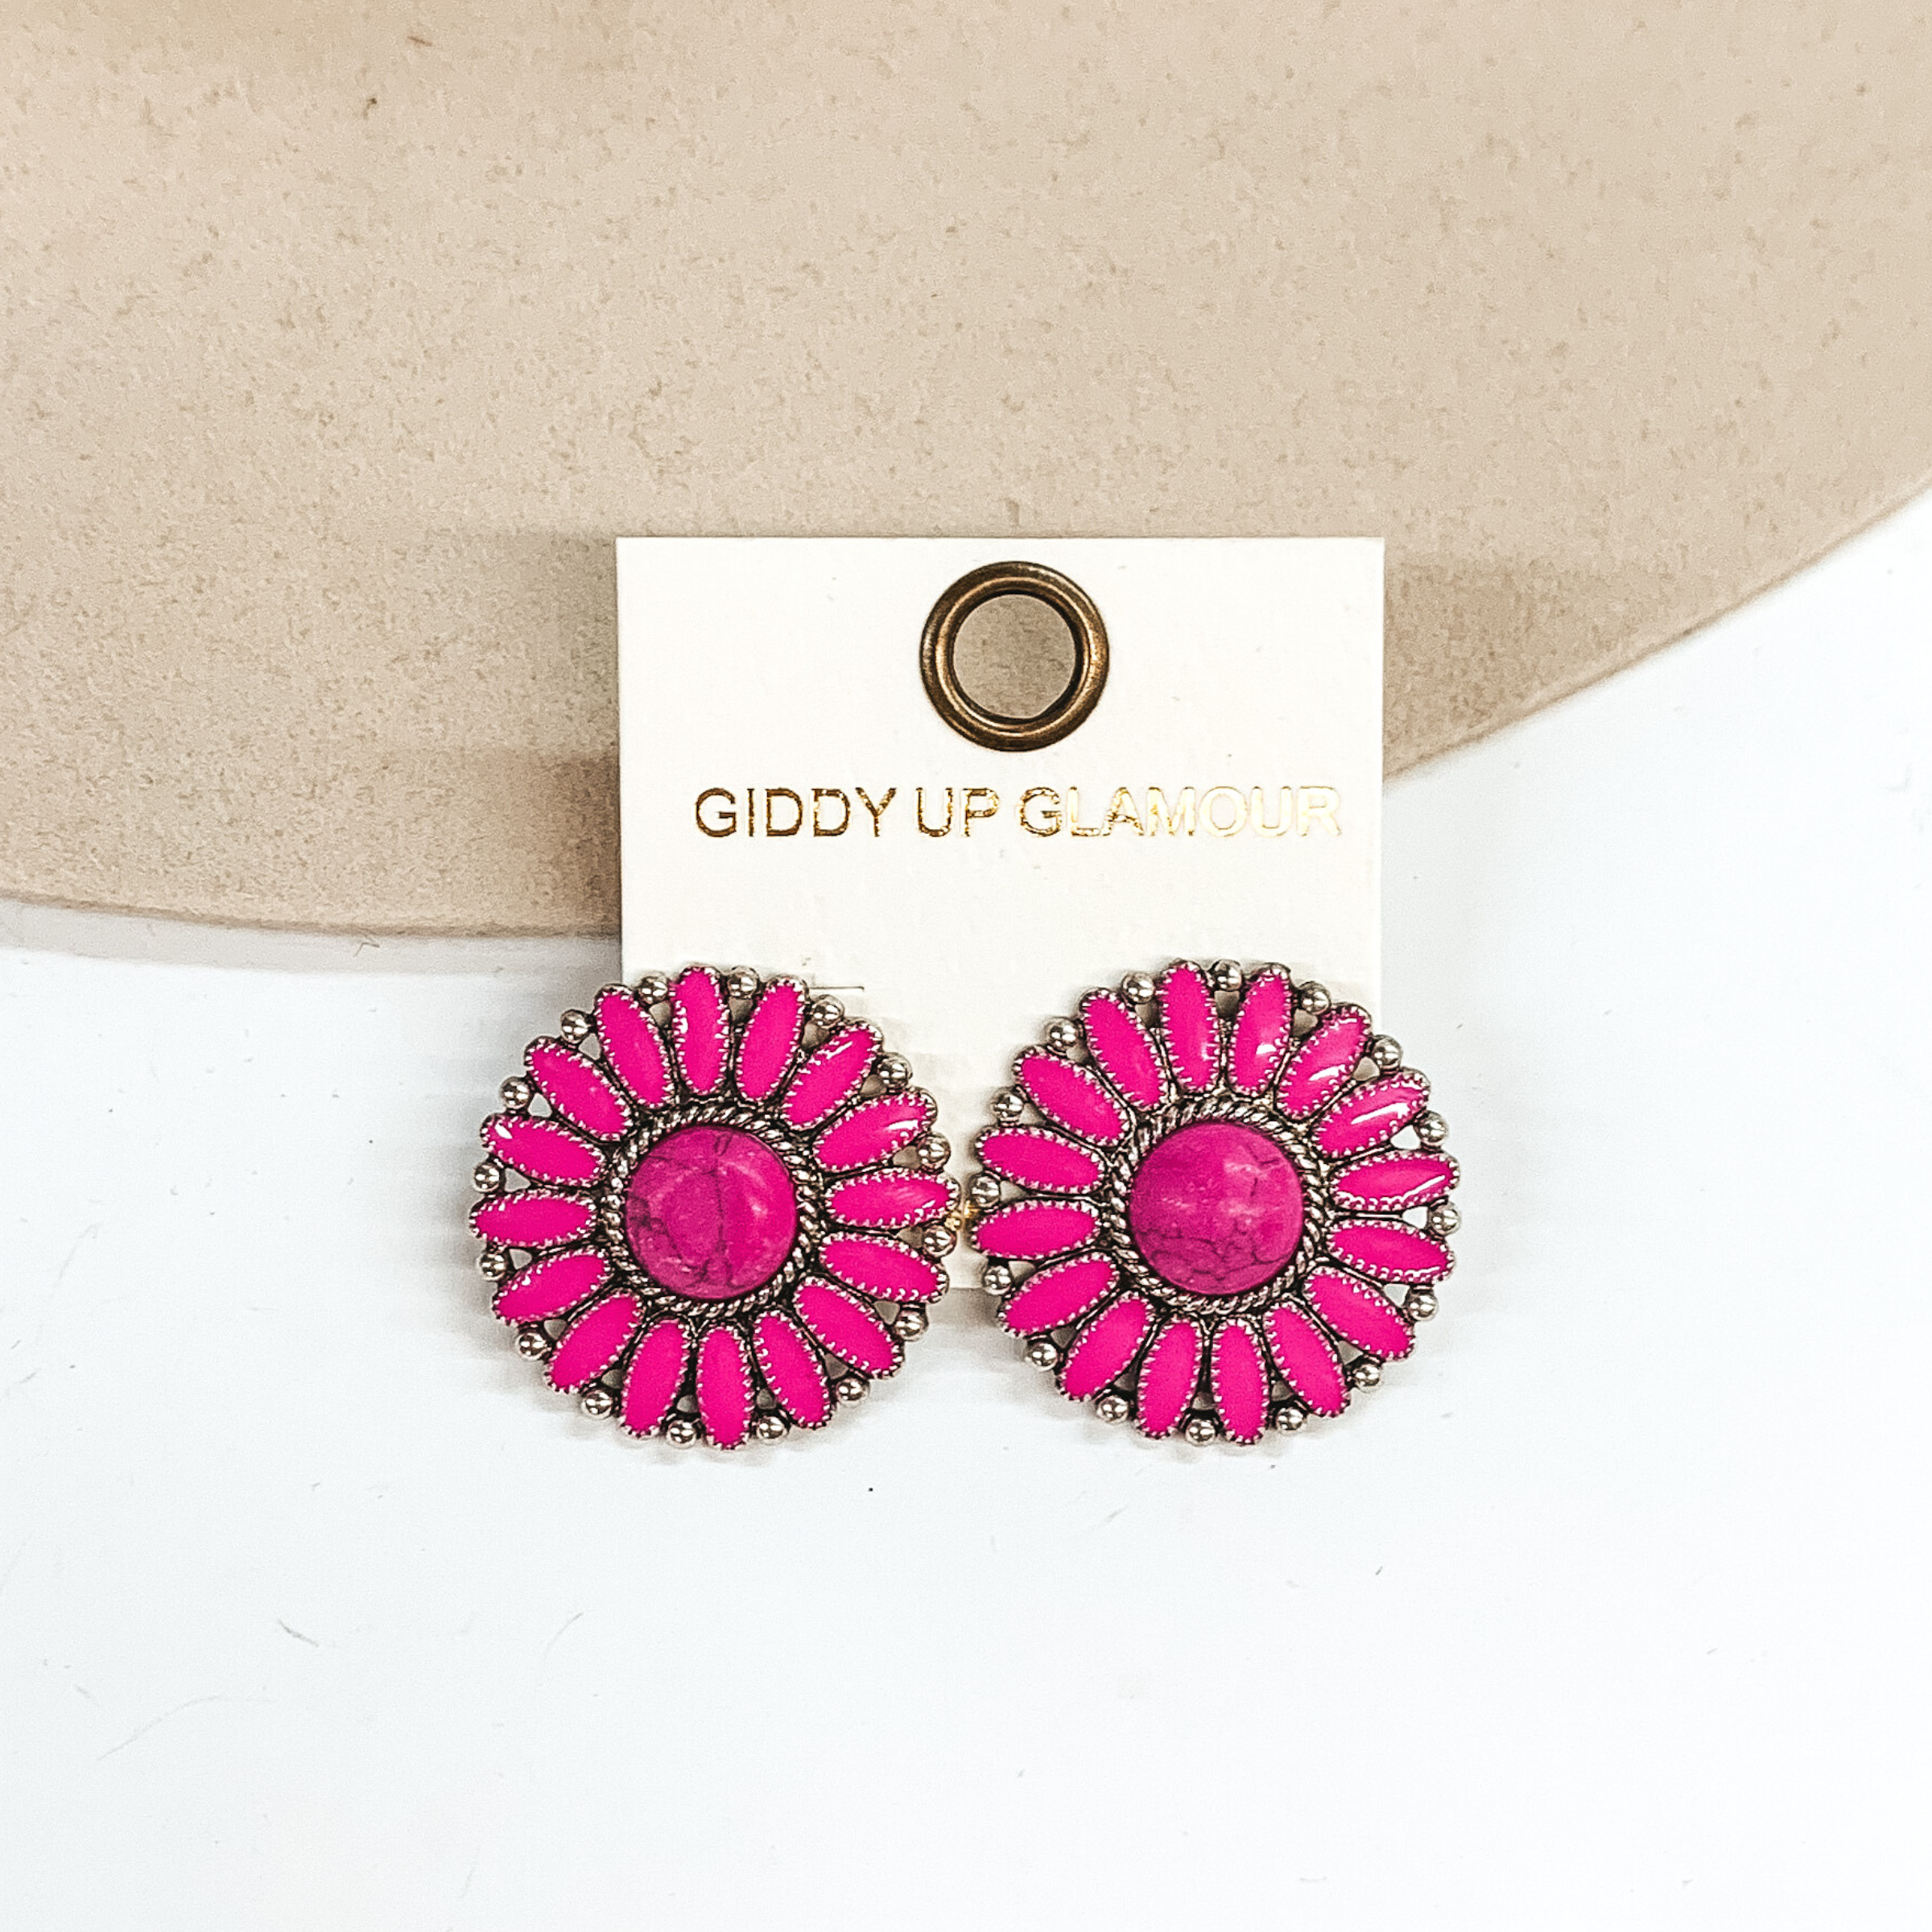 Pink concho earrings with a center pink stone and silver outline. These earrings are pictured on a white and ivory background. 